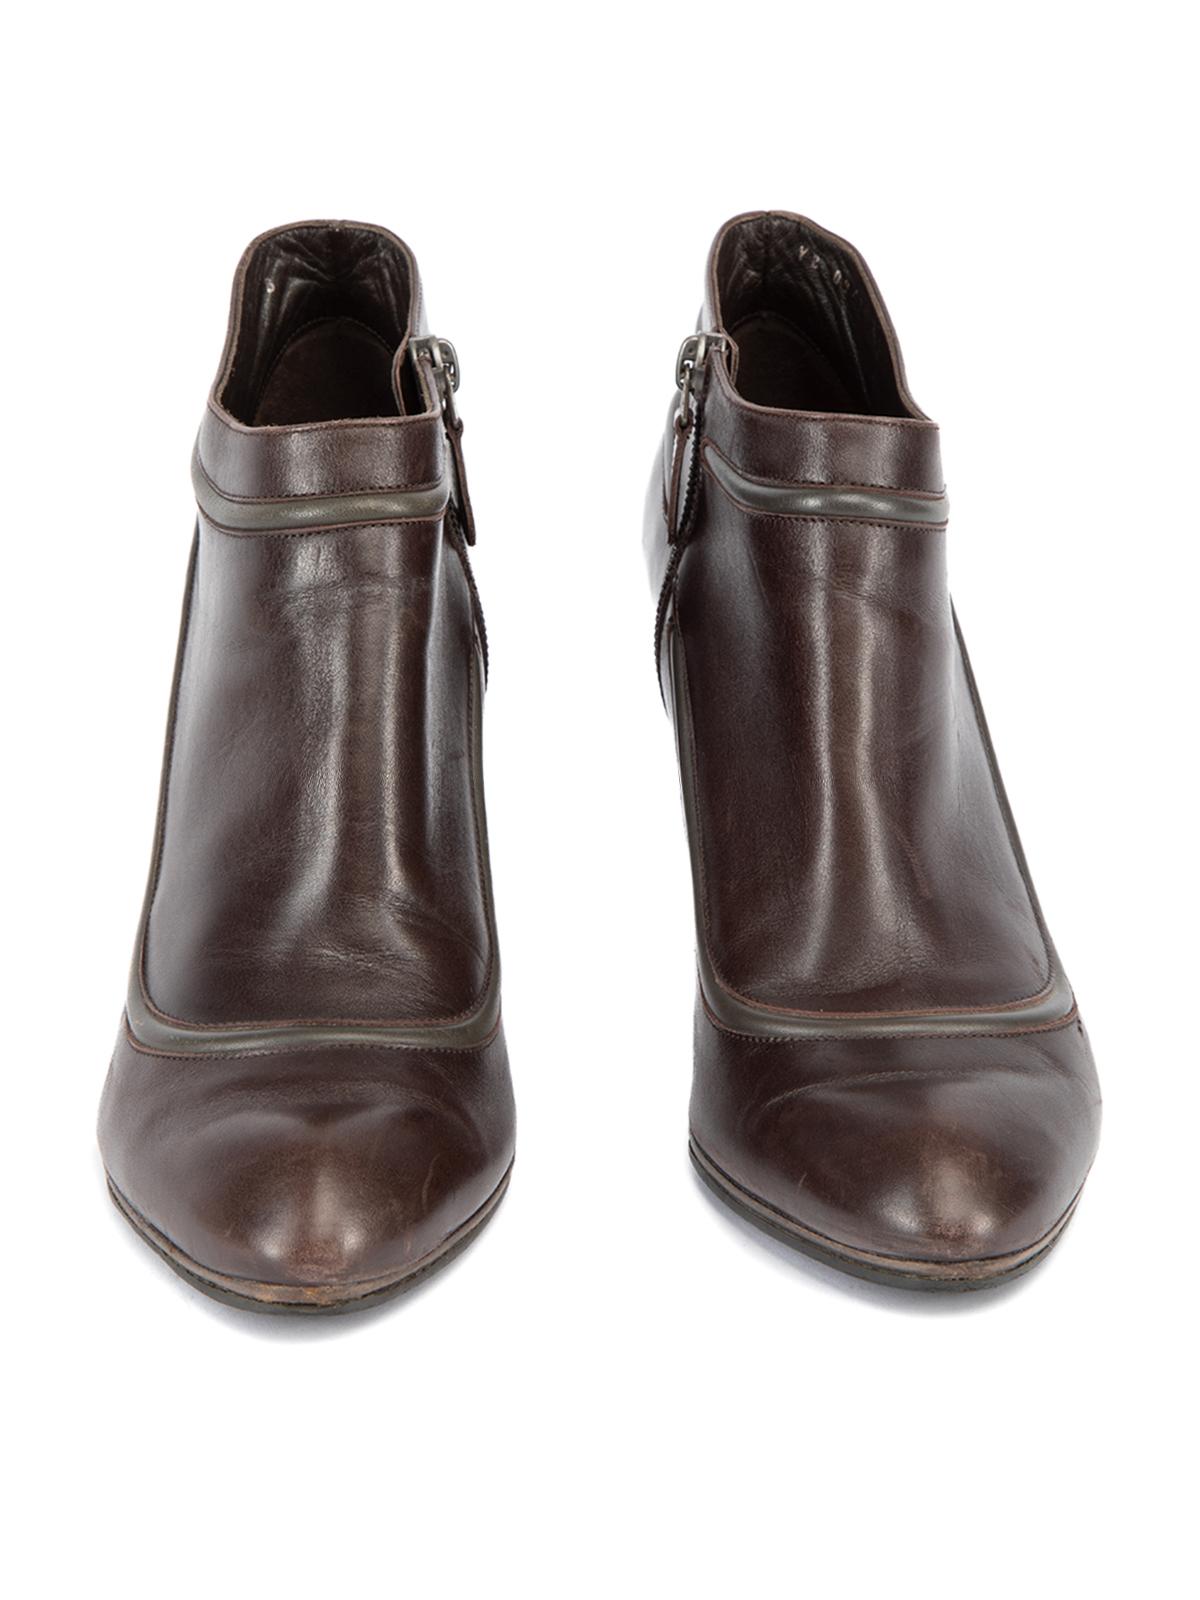 Pre-Loved Salvatore Ferragamo Women's Brown Leather Pointed Toe Booties In Excellent Condition For Sale In London, GB